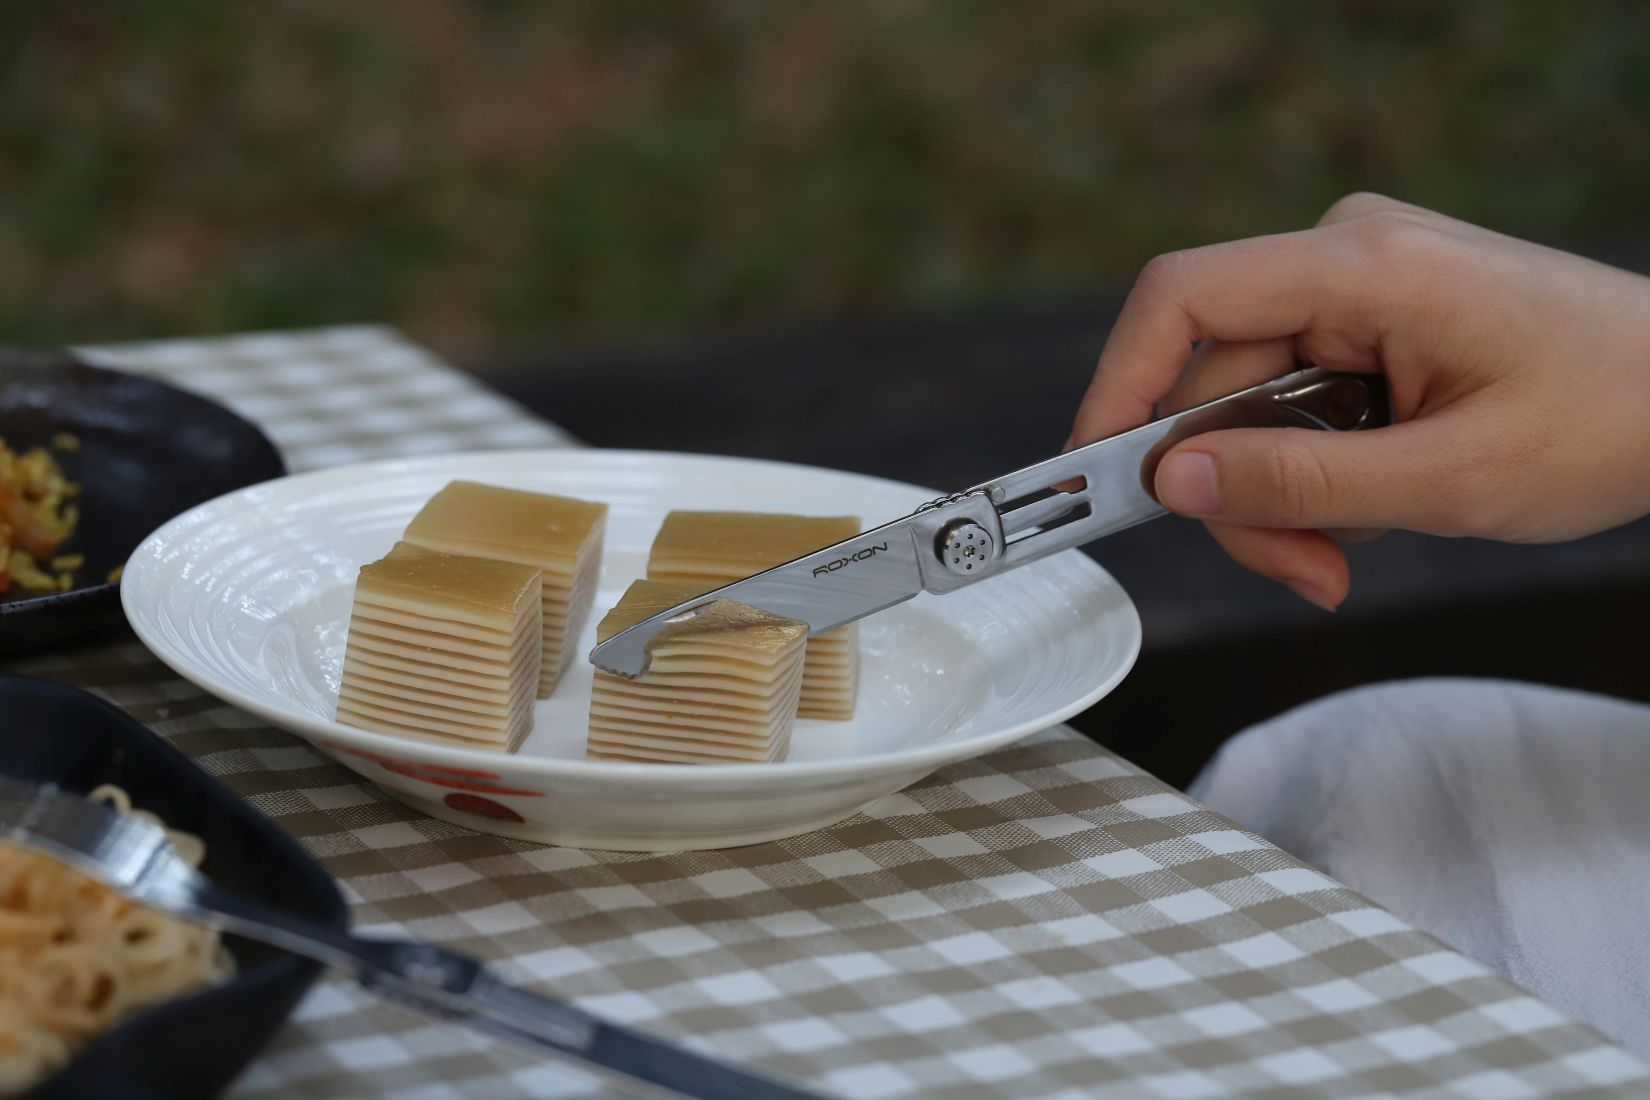 Foldable cutlery from Roxon - only 10cm long when folded